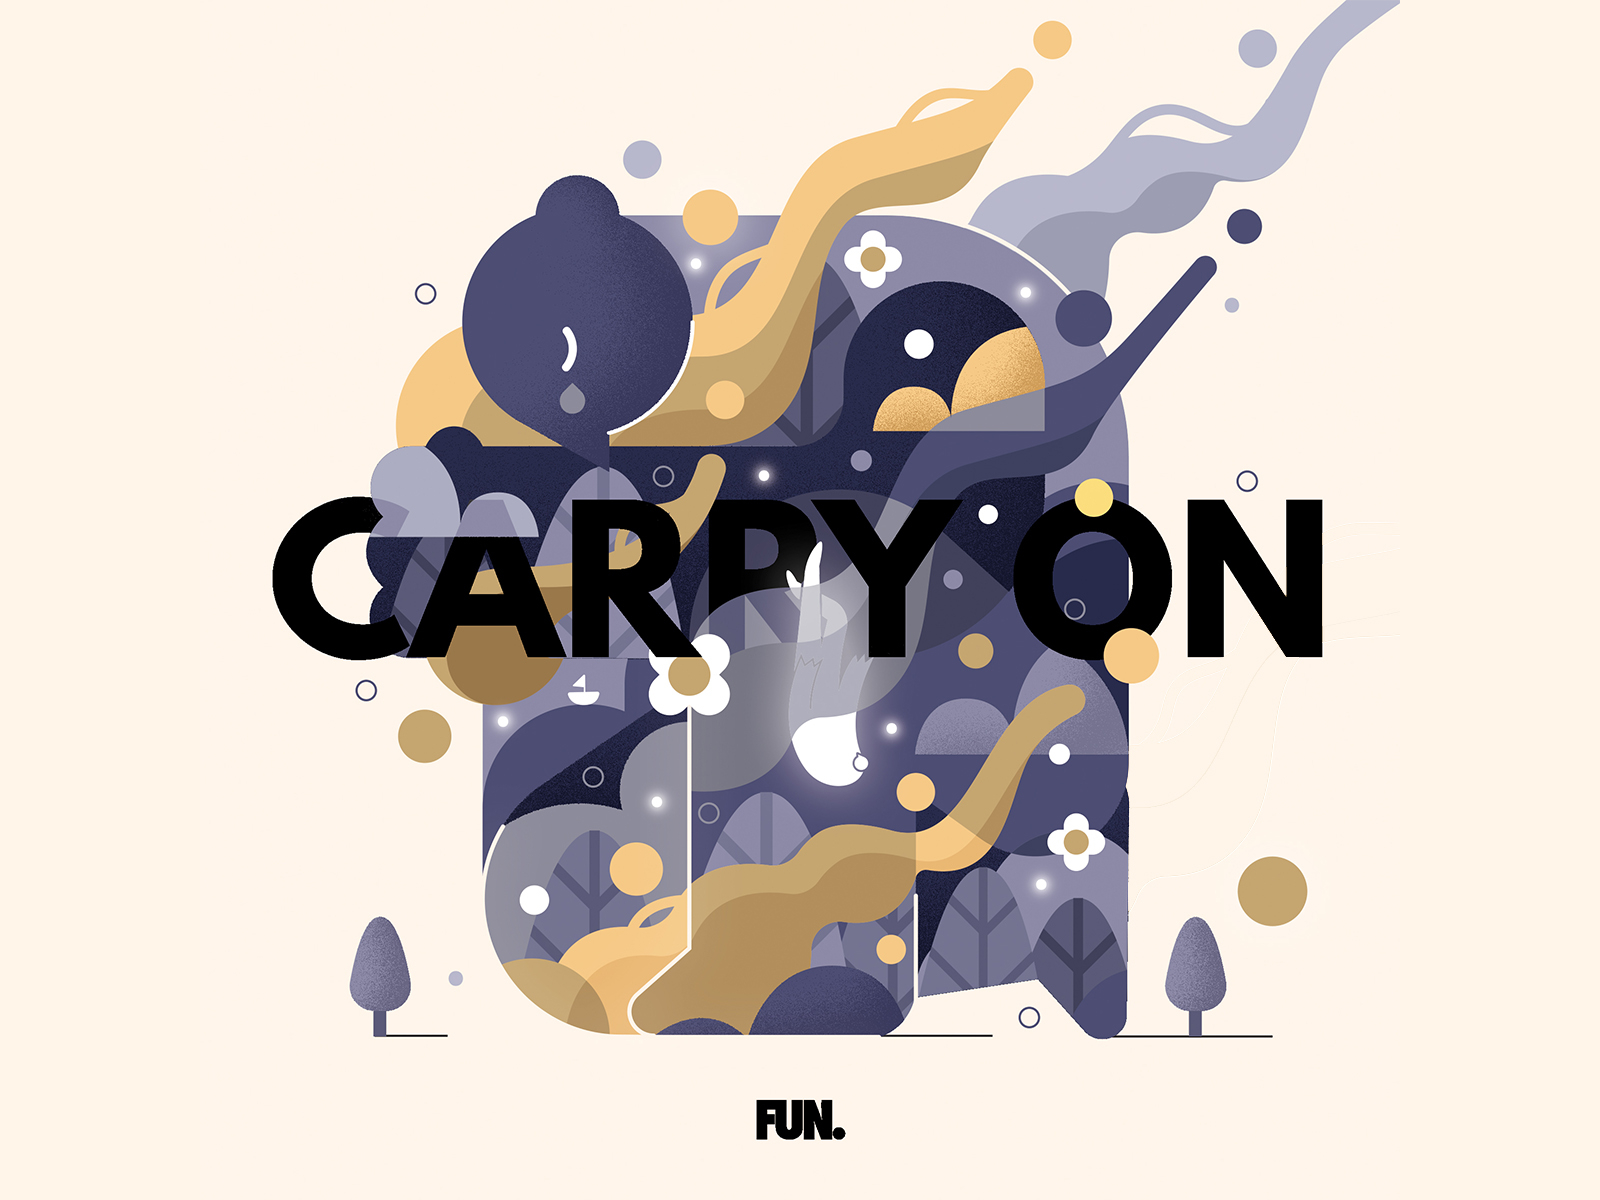 FUN. - Carry On carryon character color cover design fight fun fun. human illustration imagination indonesia love music people vector